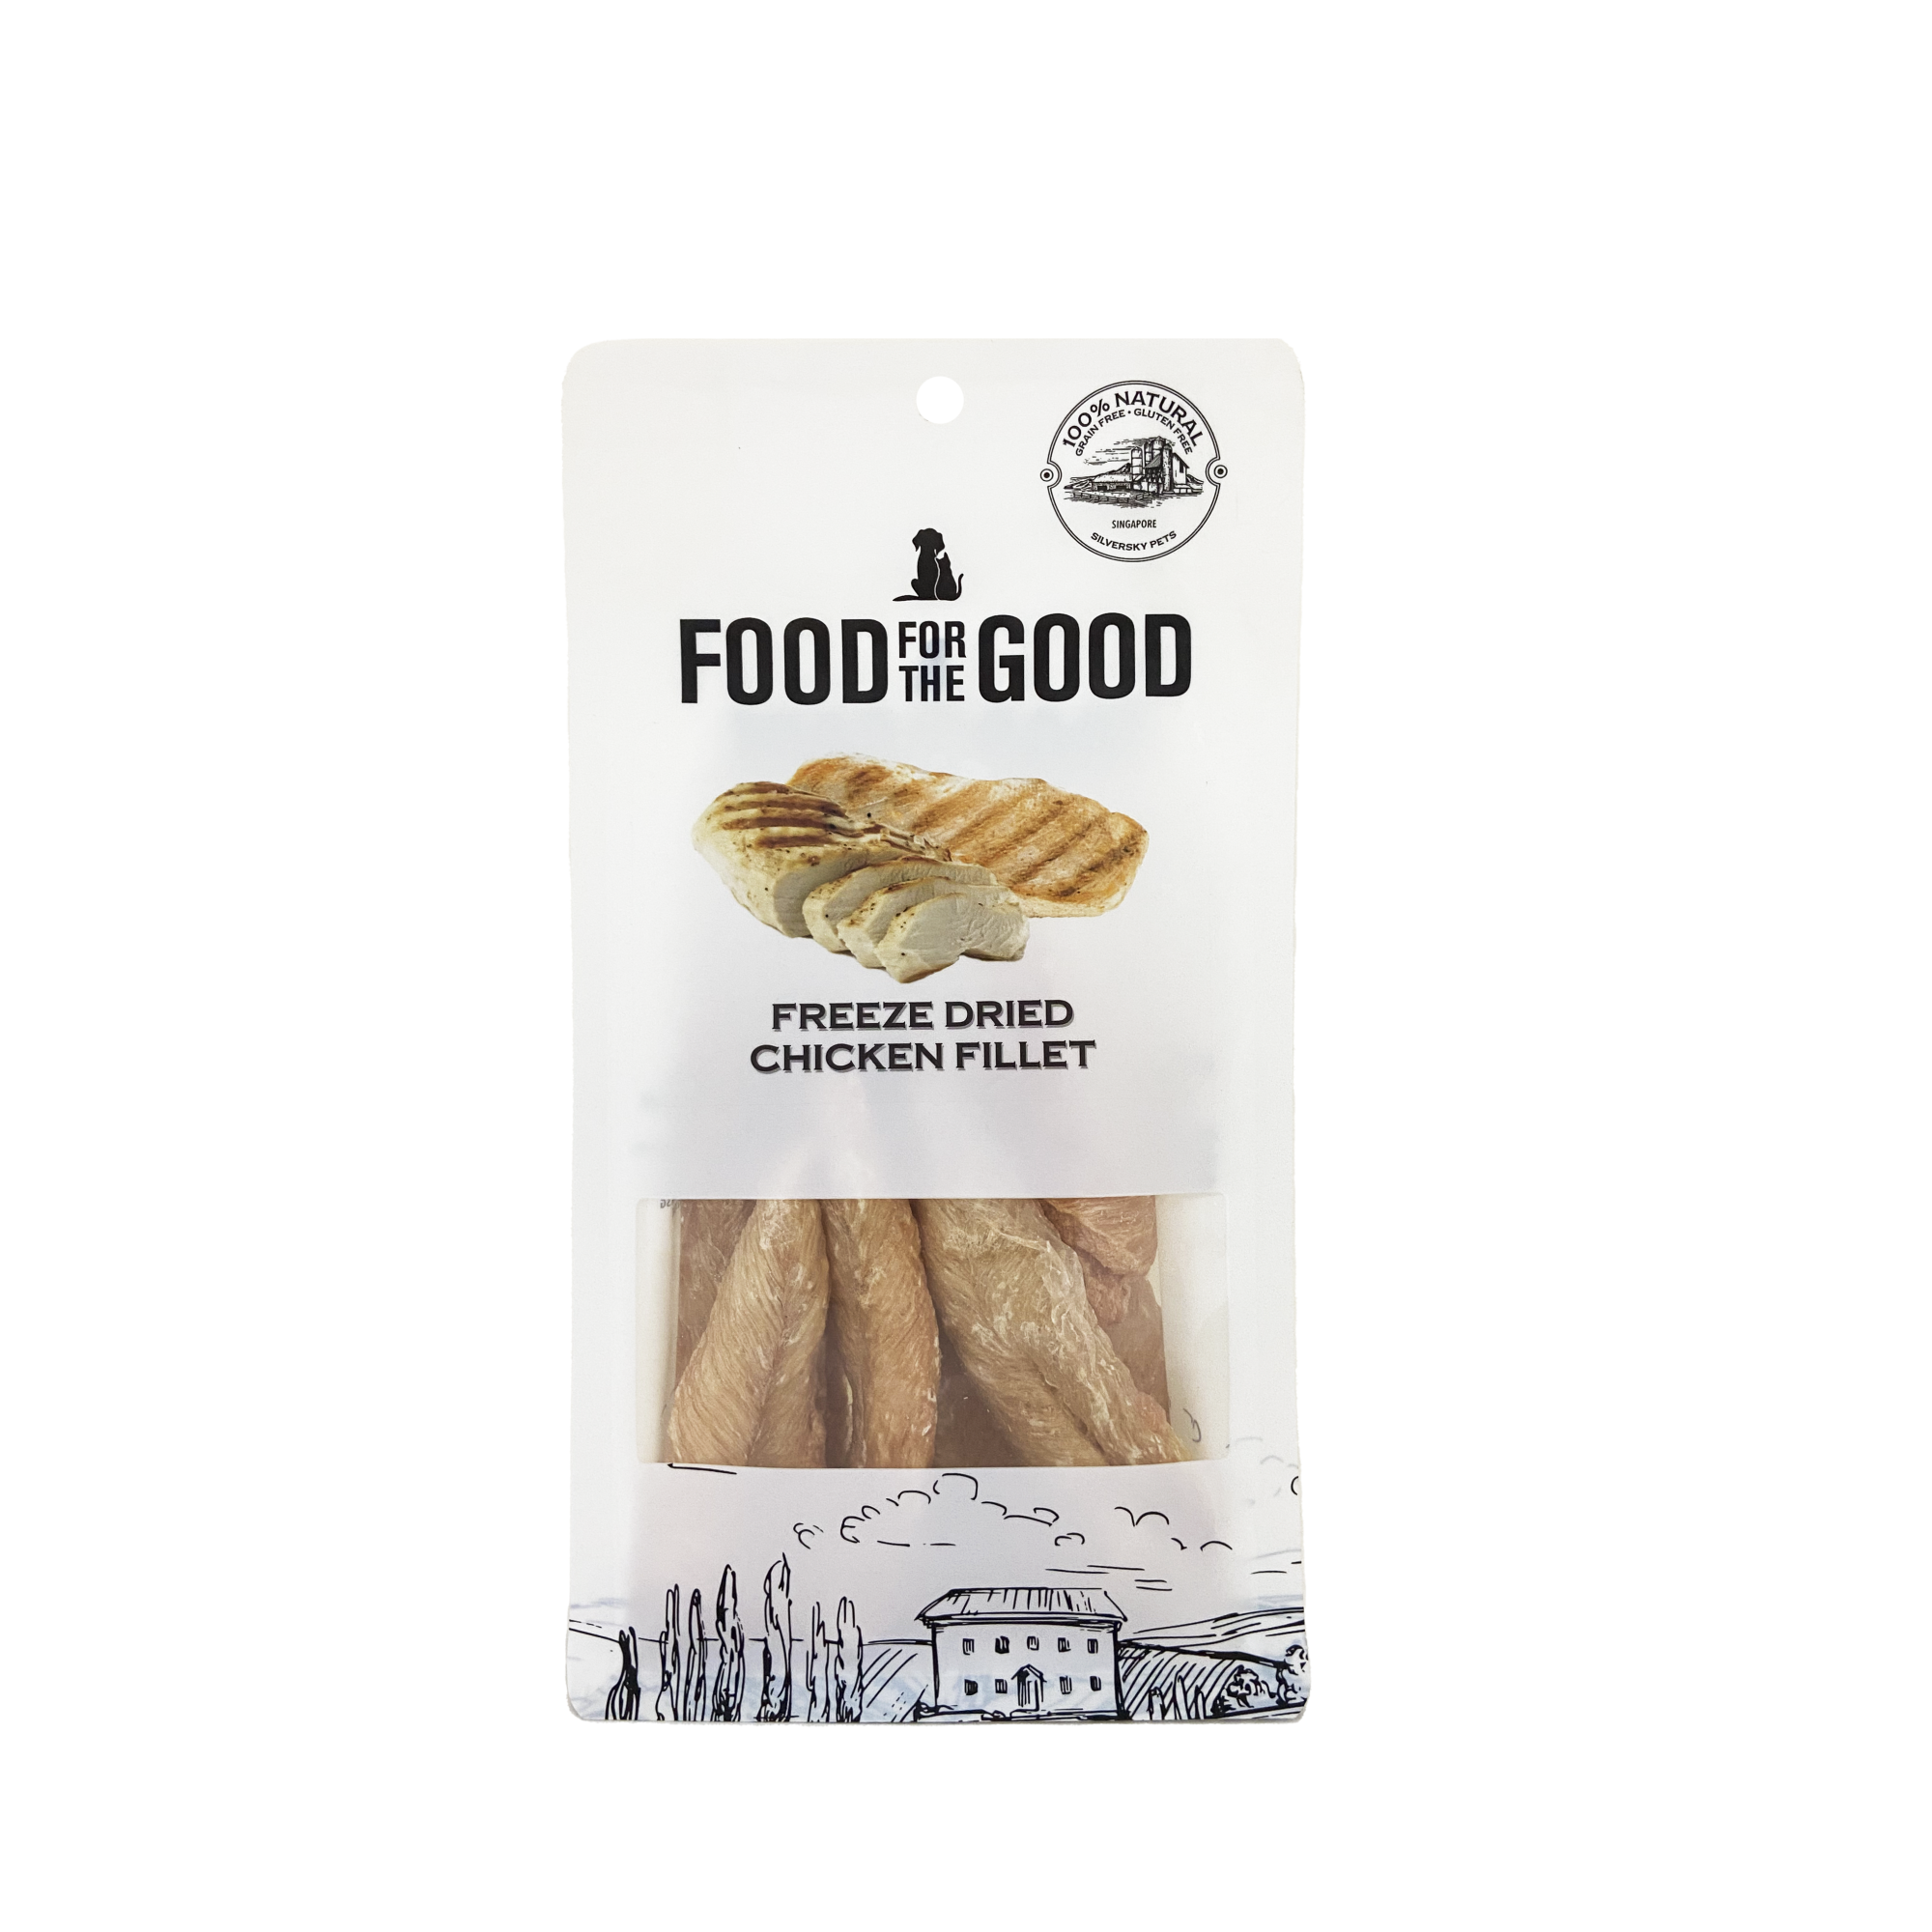 Food for the Good - Freeze Dried Chicken Fillet Cat & Dog Treats 100g